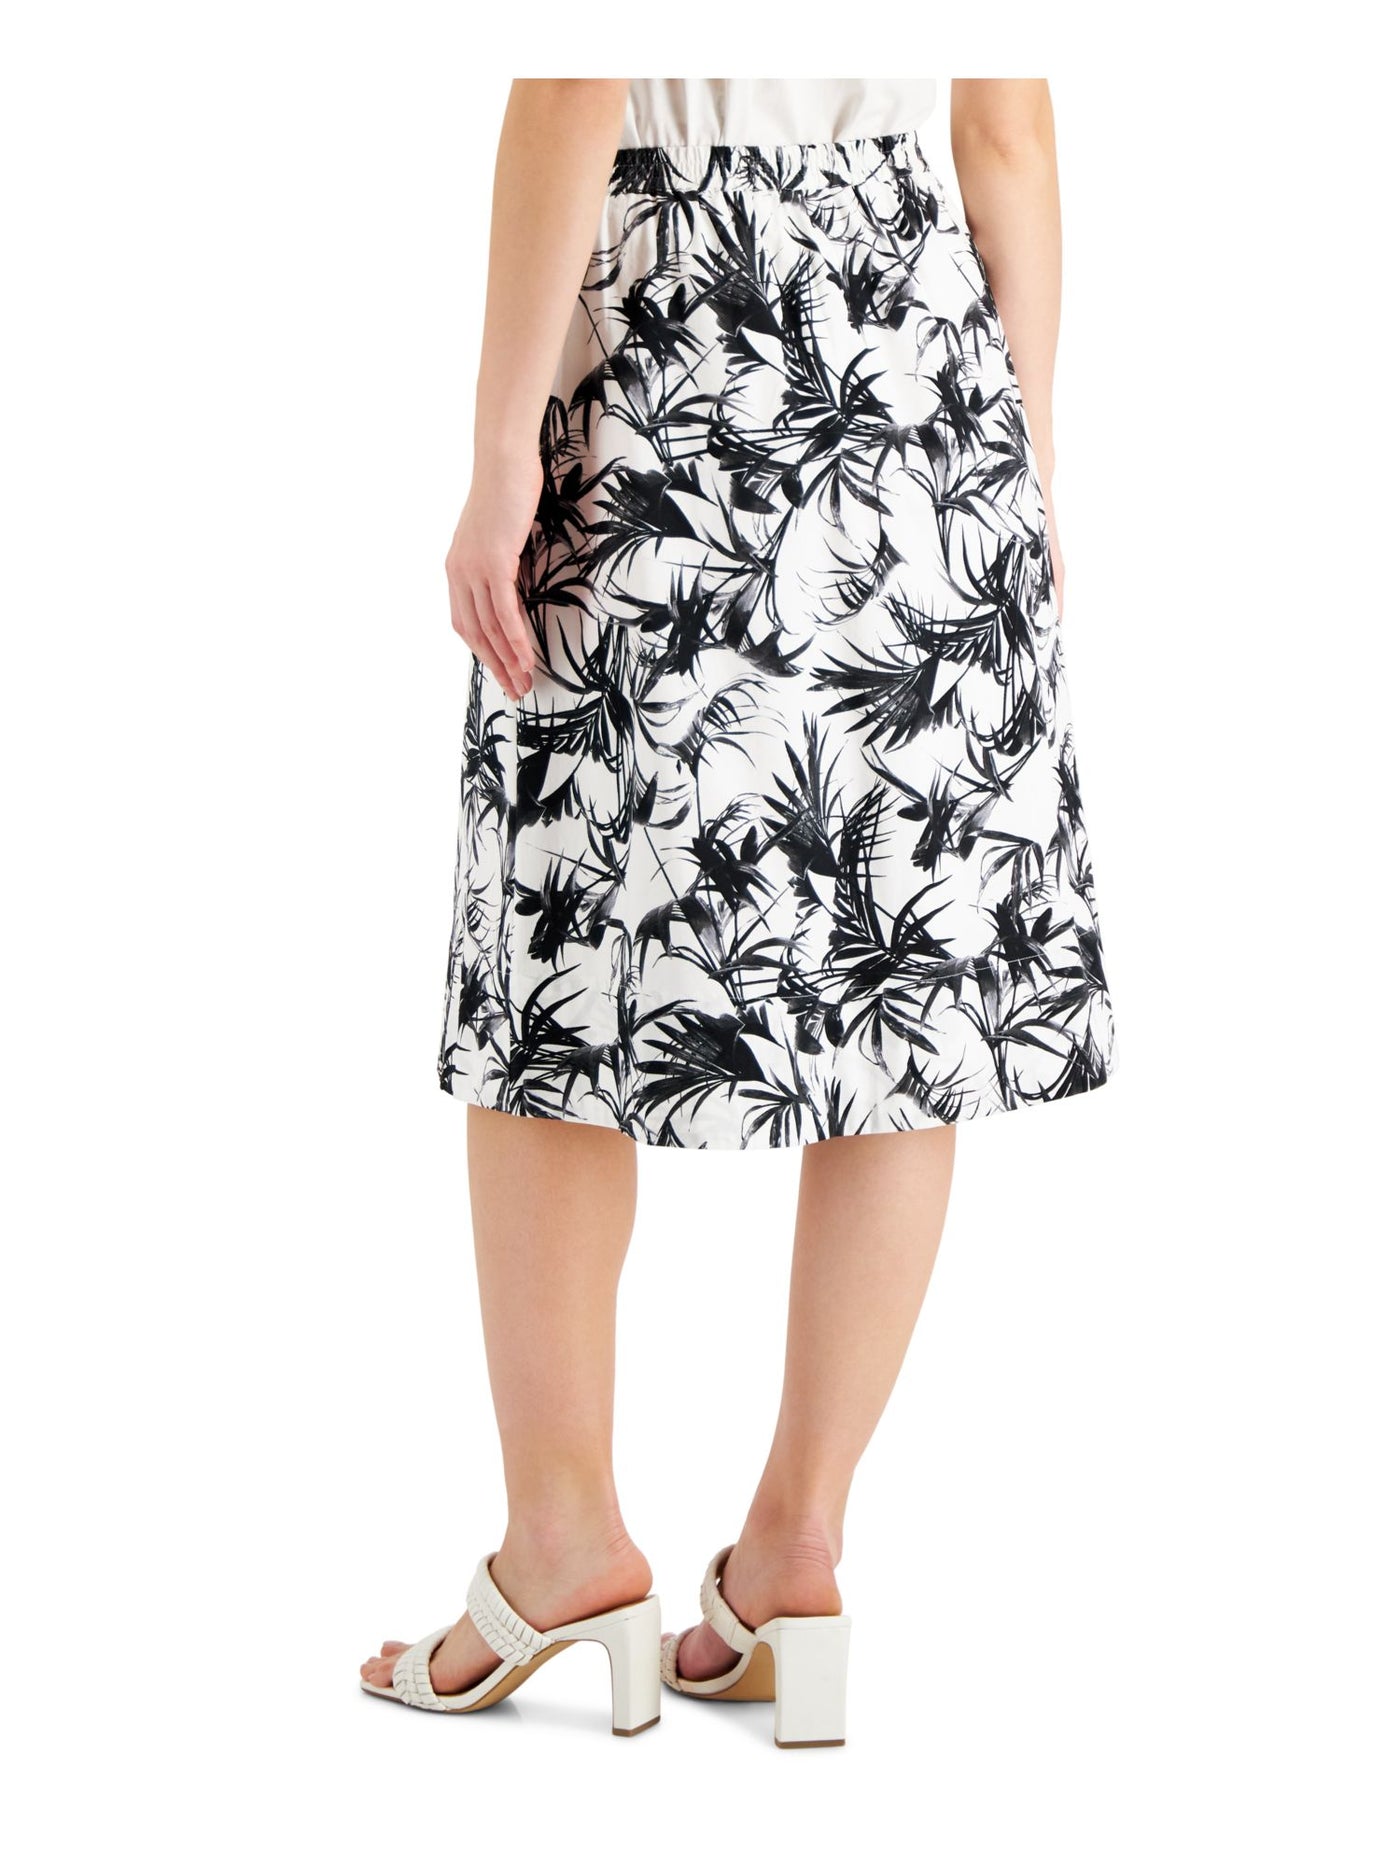 DONNA KARAN NEW YORK Womens White Lined Pocketed Elastic Waist Pull On Printed Below The Knee A-Line Skirt L